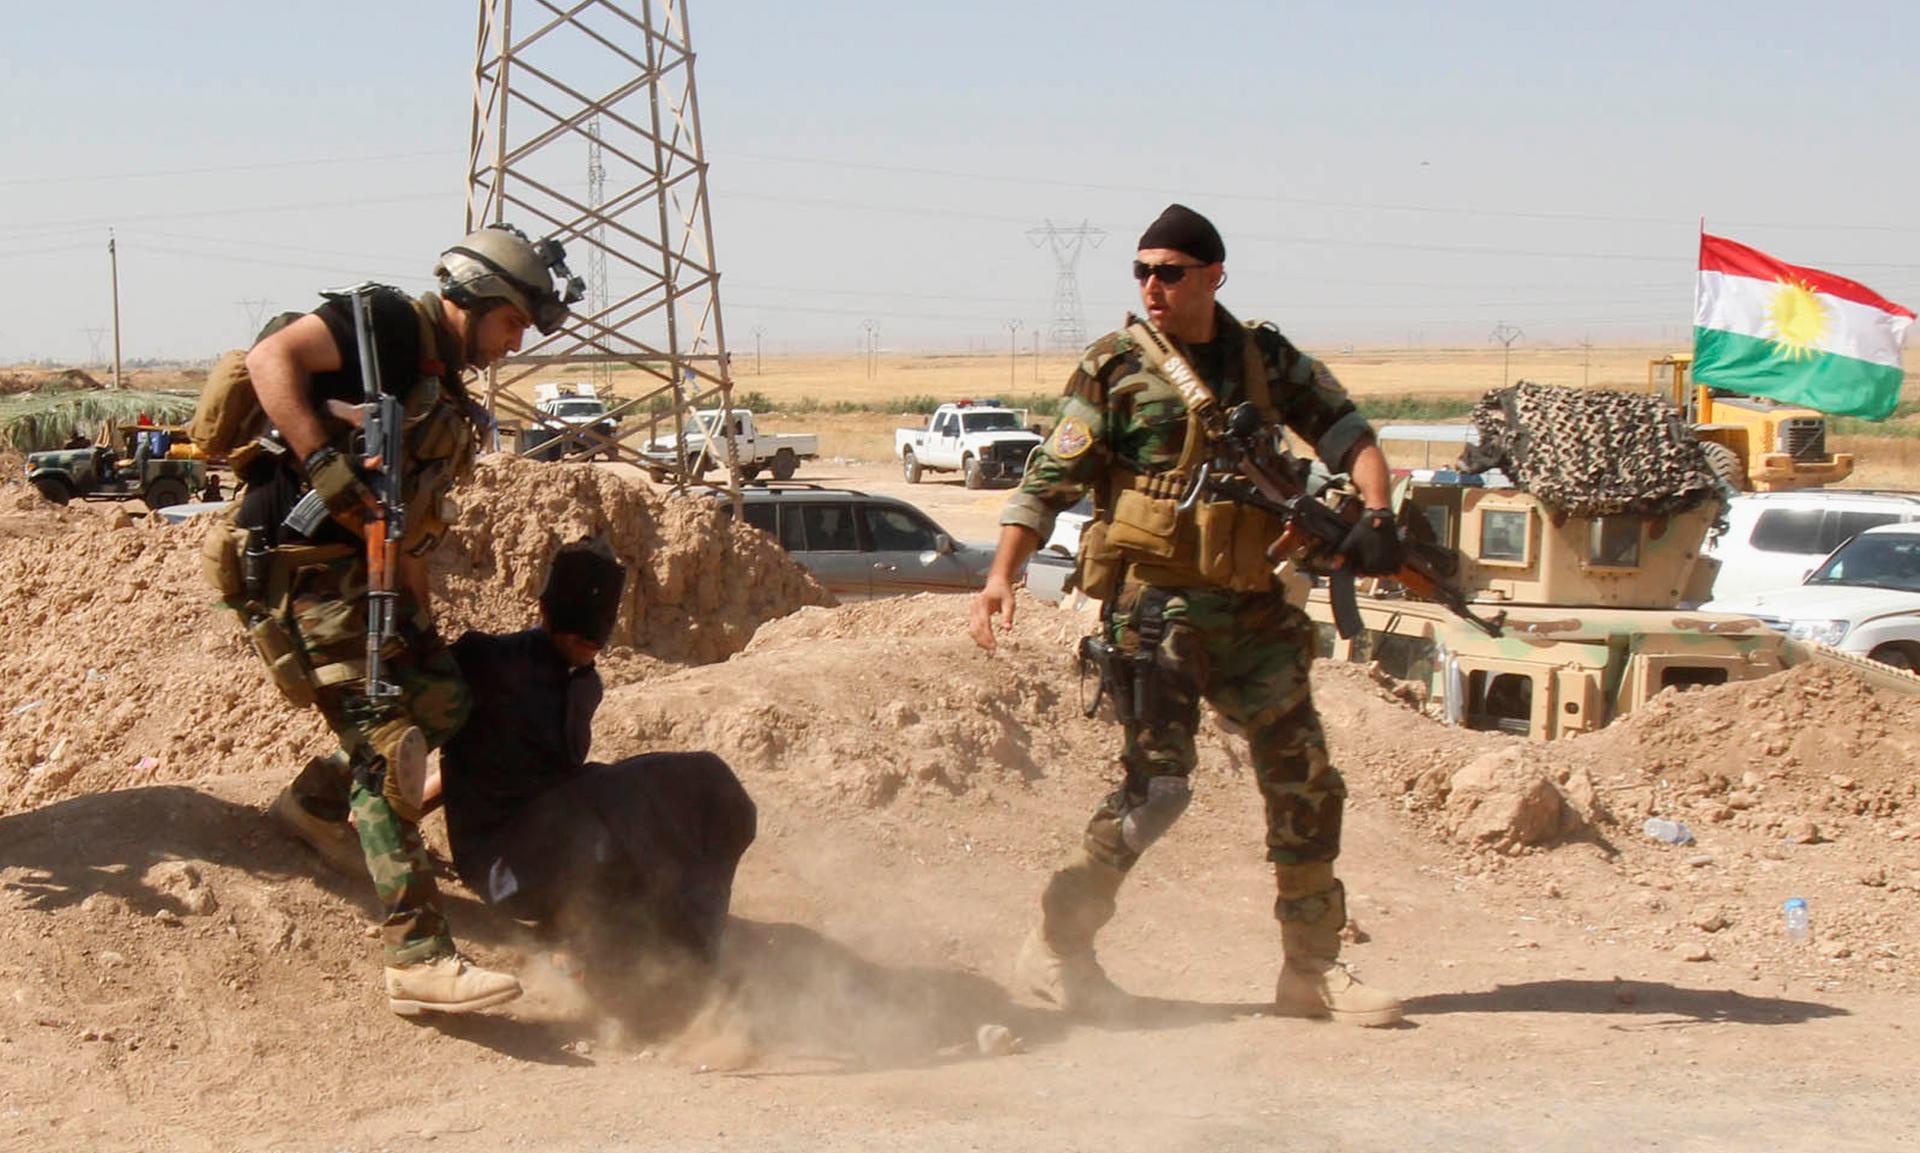 Kurdish security forces in Iraq detain a man suspected of being a militant belonging to the al-Qaeda-linked Islamic State in Iraq and Syria (ISIS), June 16, 2014. Iraq's Shiite rulers defied Western calls to reach out to Sunnis to defuse the ISIS uprising